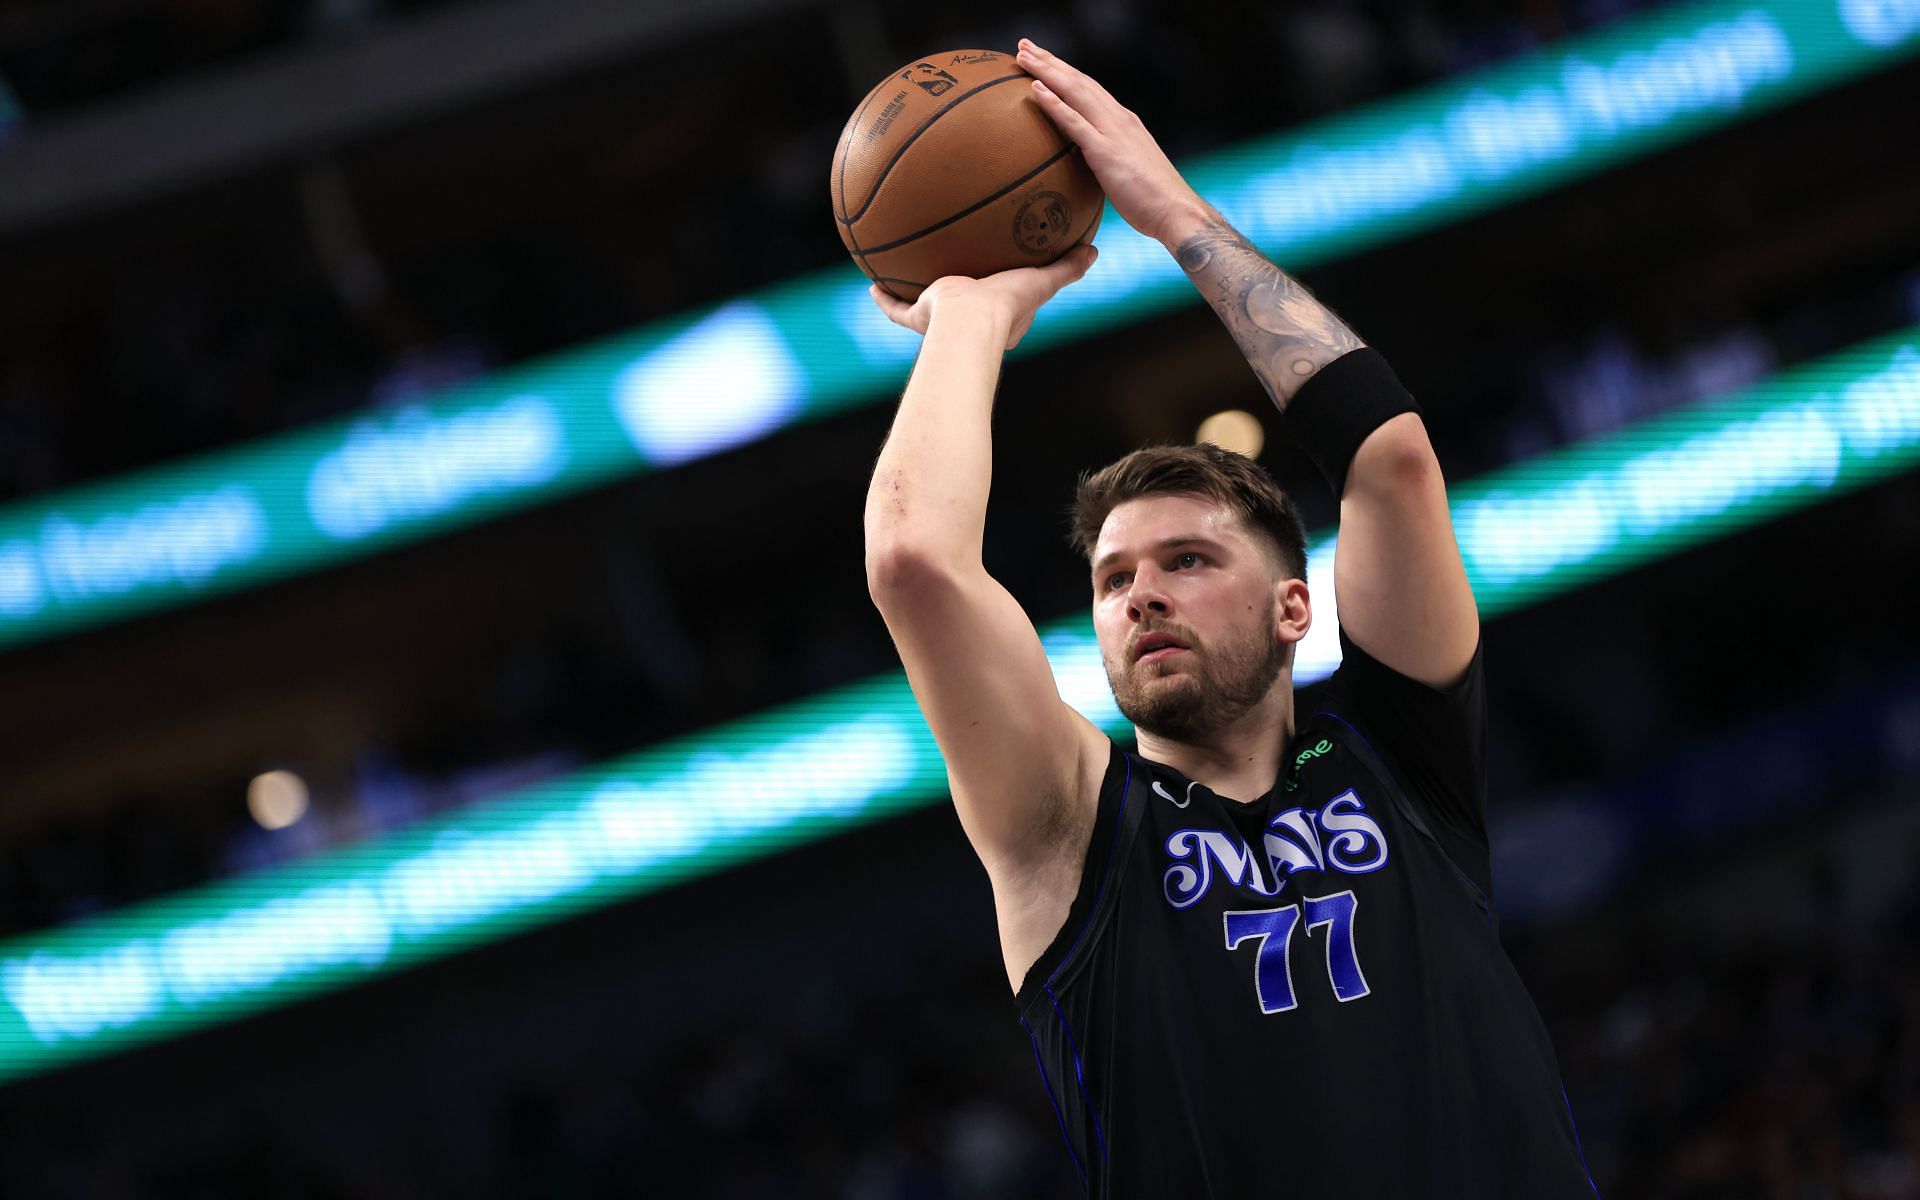 The youngest player on our list of top noncollege NBA pros, Luka Doncic may just be getting started.